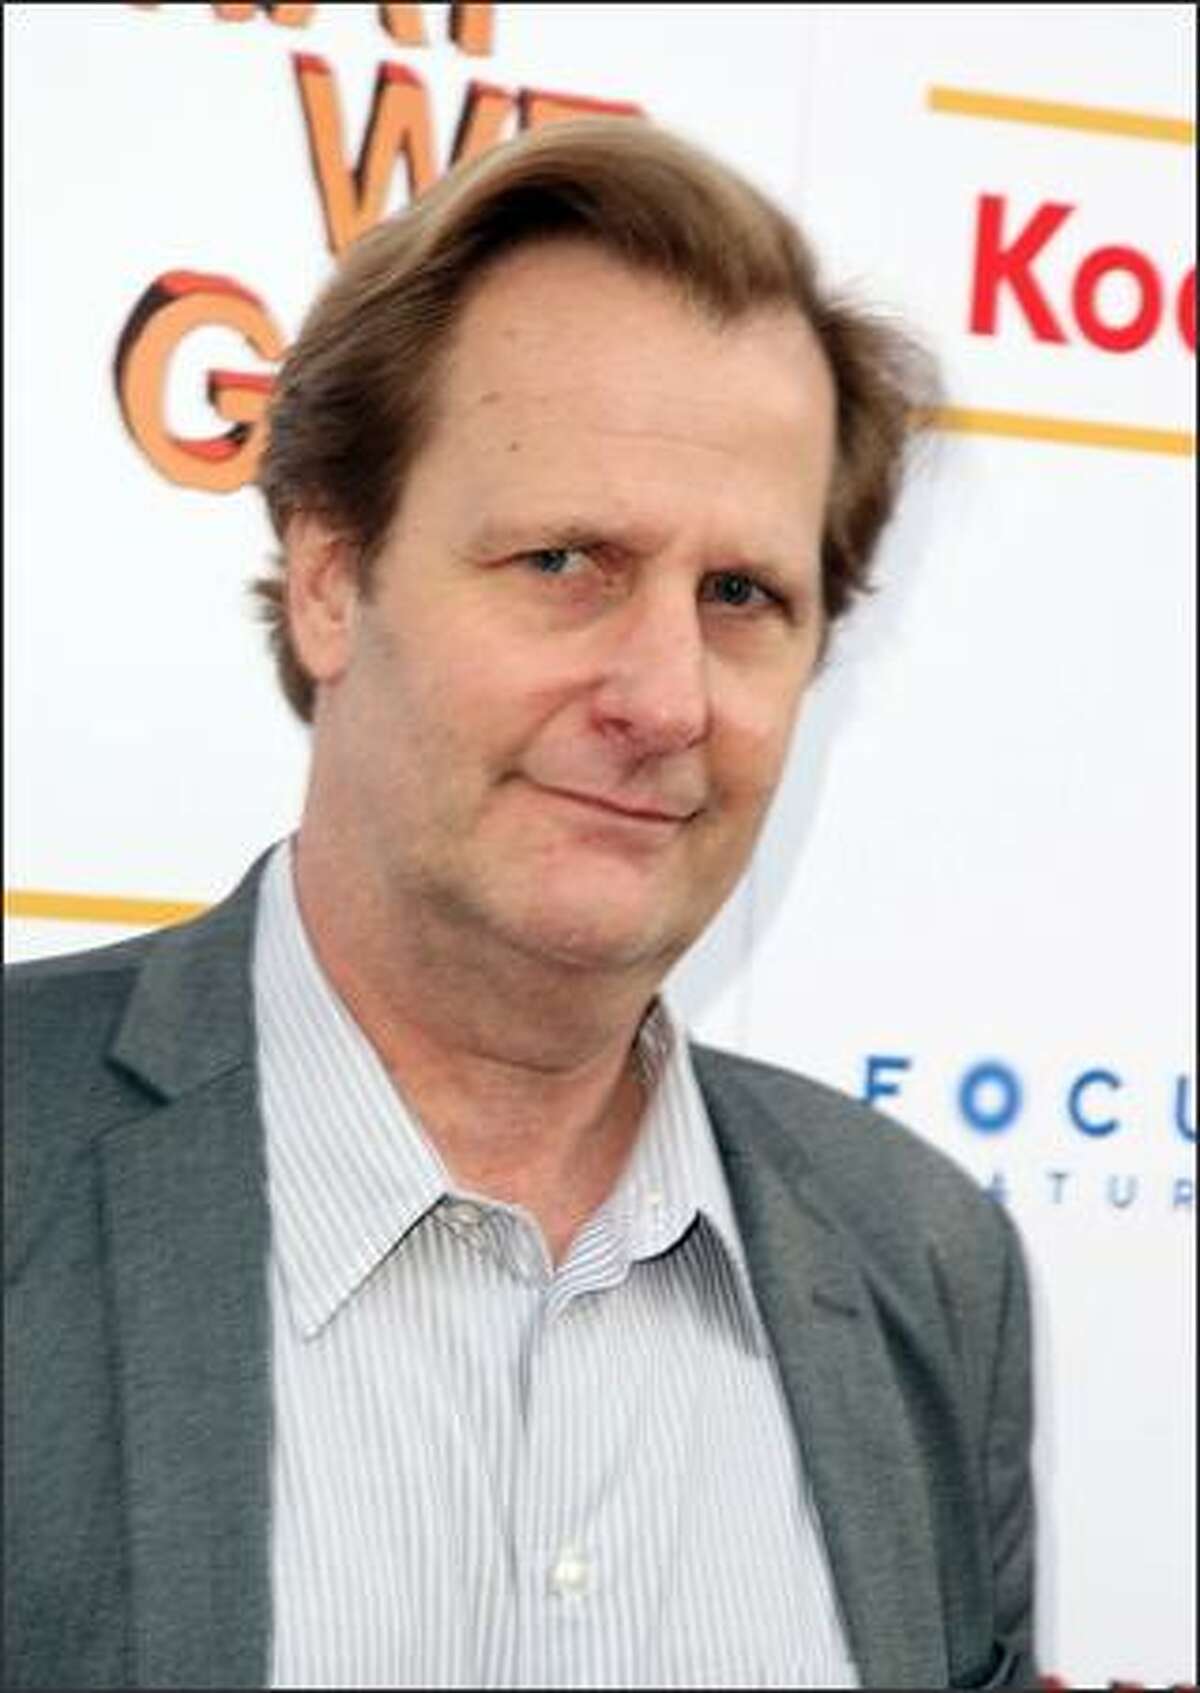 Actor Jeff Daniels attends a special New York screening of "Away We Go" at Landmark's Sunshine Cinema in New York City.